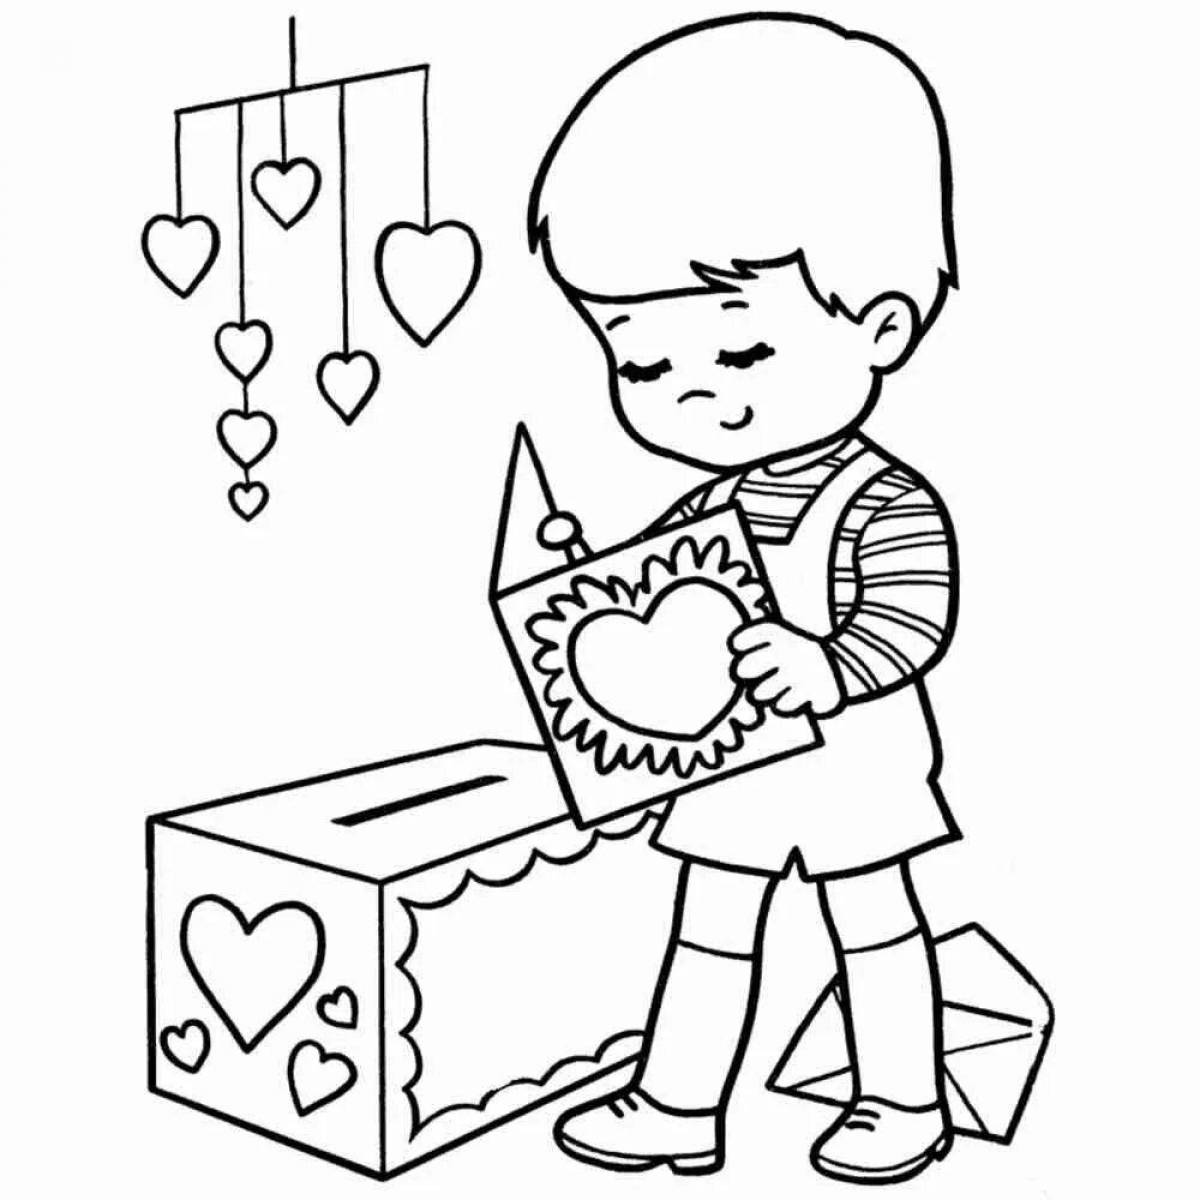 Refreshing valentine coloring for kids